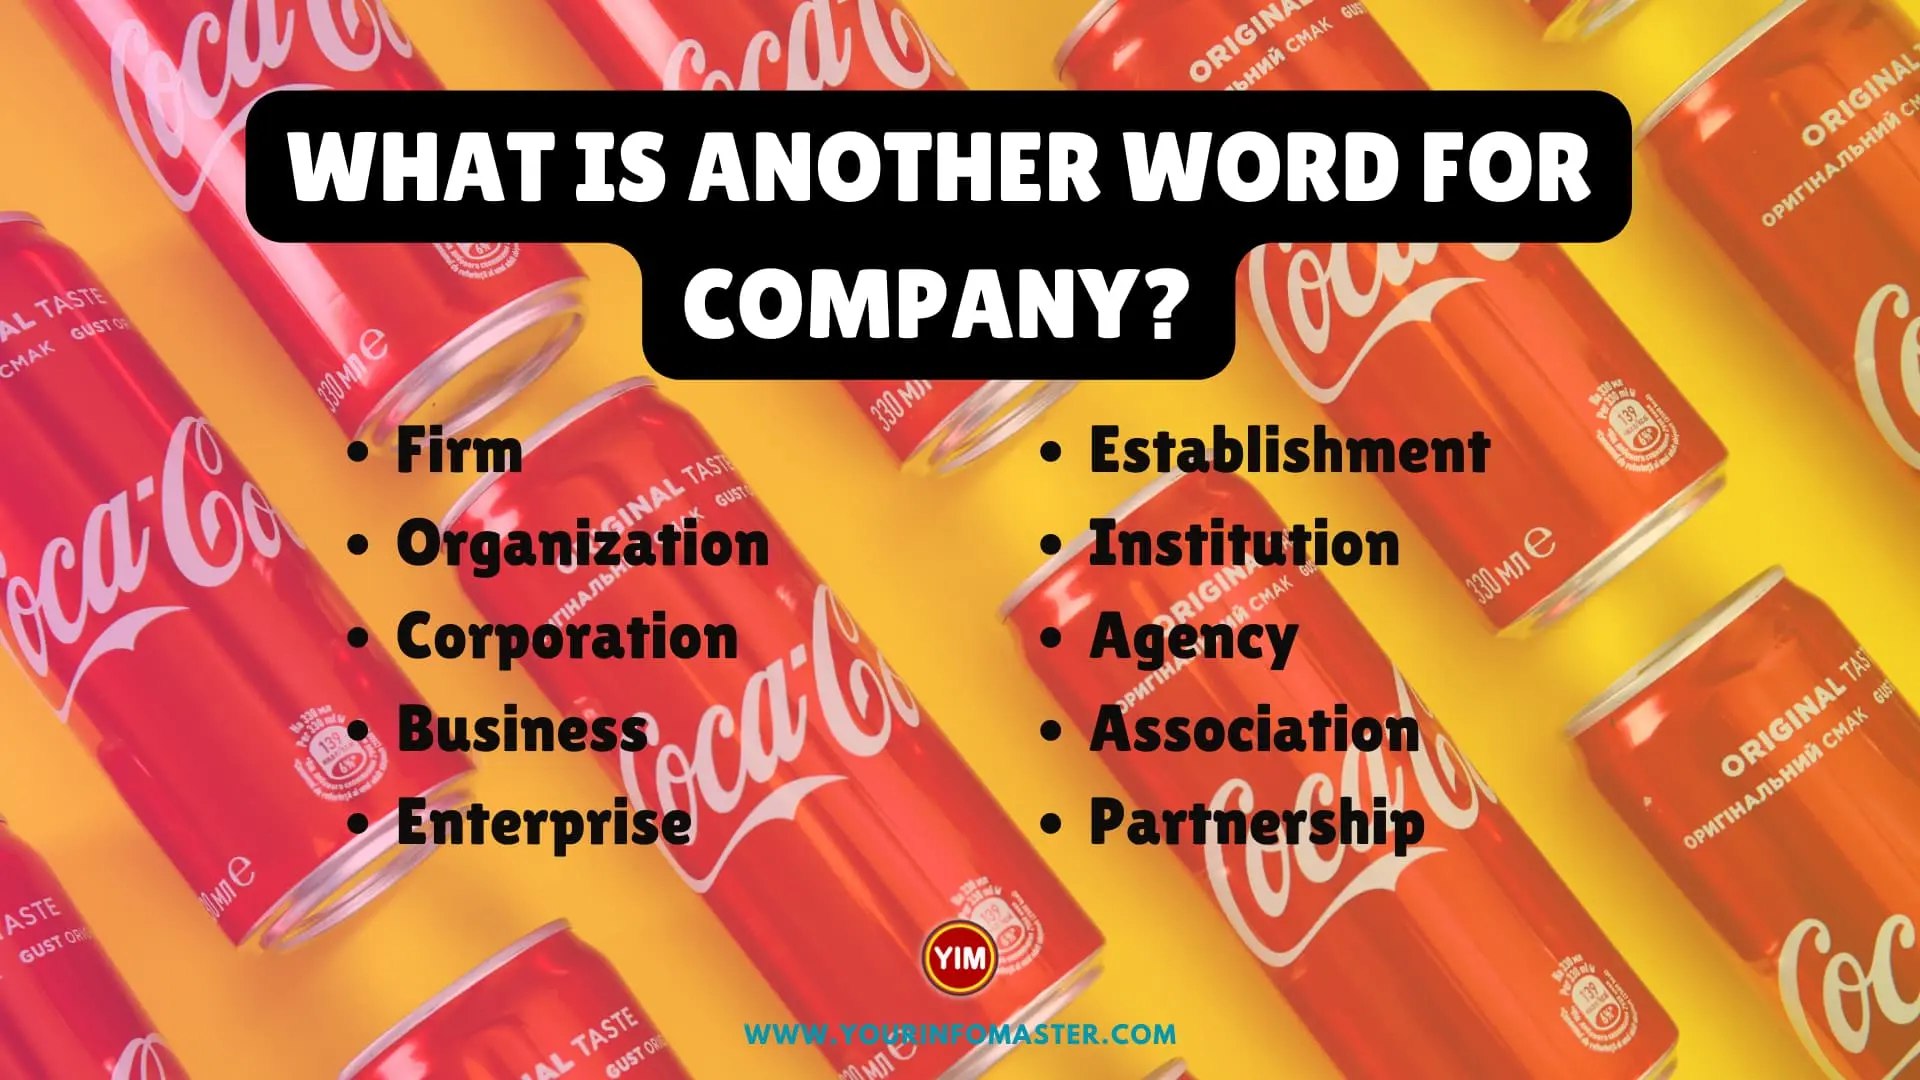 What is another word for Company